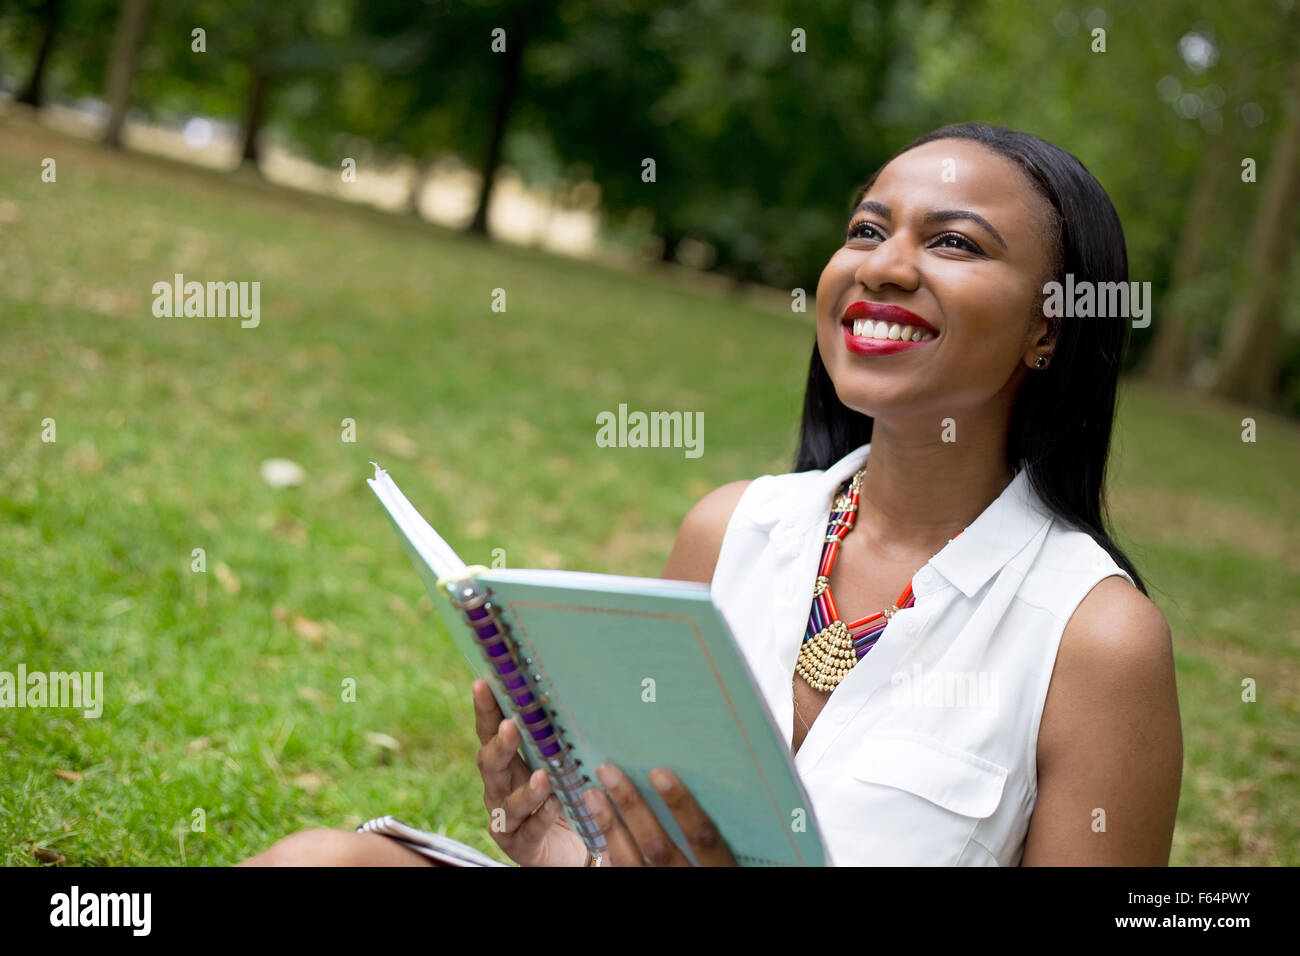 young student sitting in the park holding her textbook Stock Photo